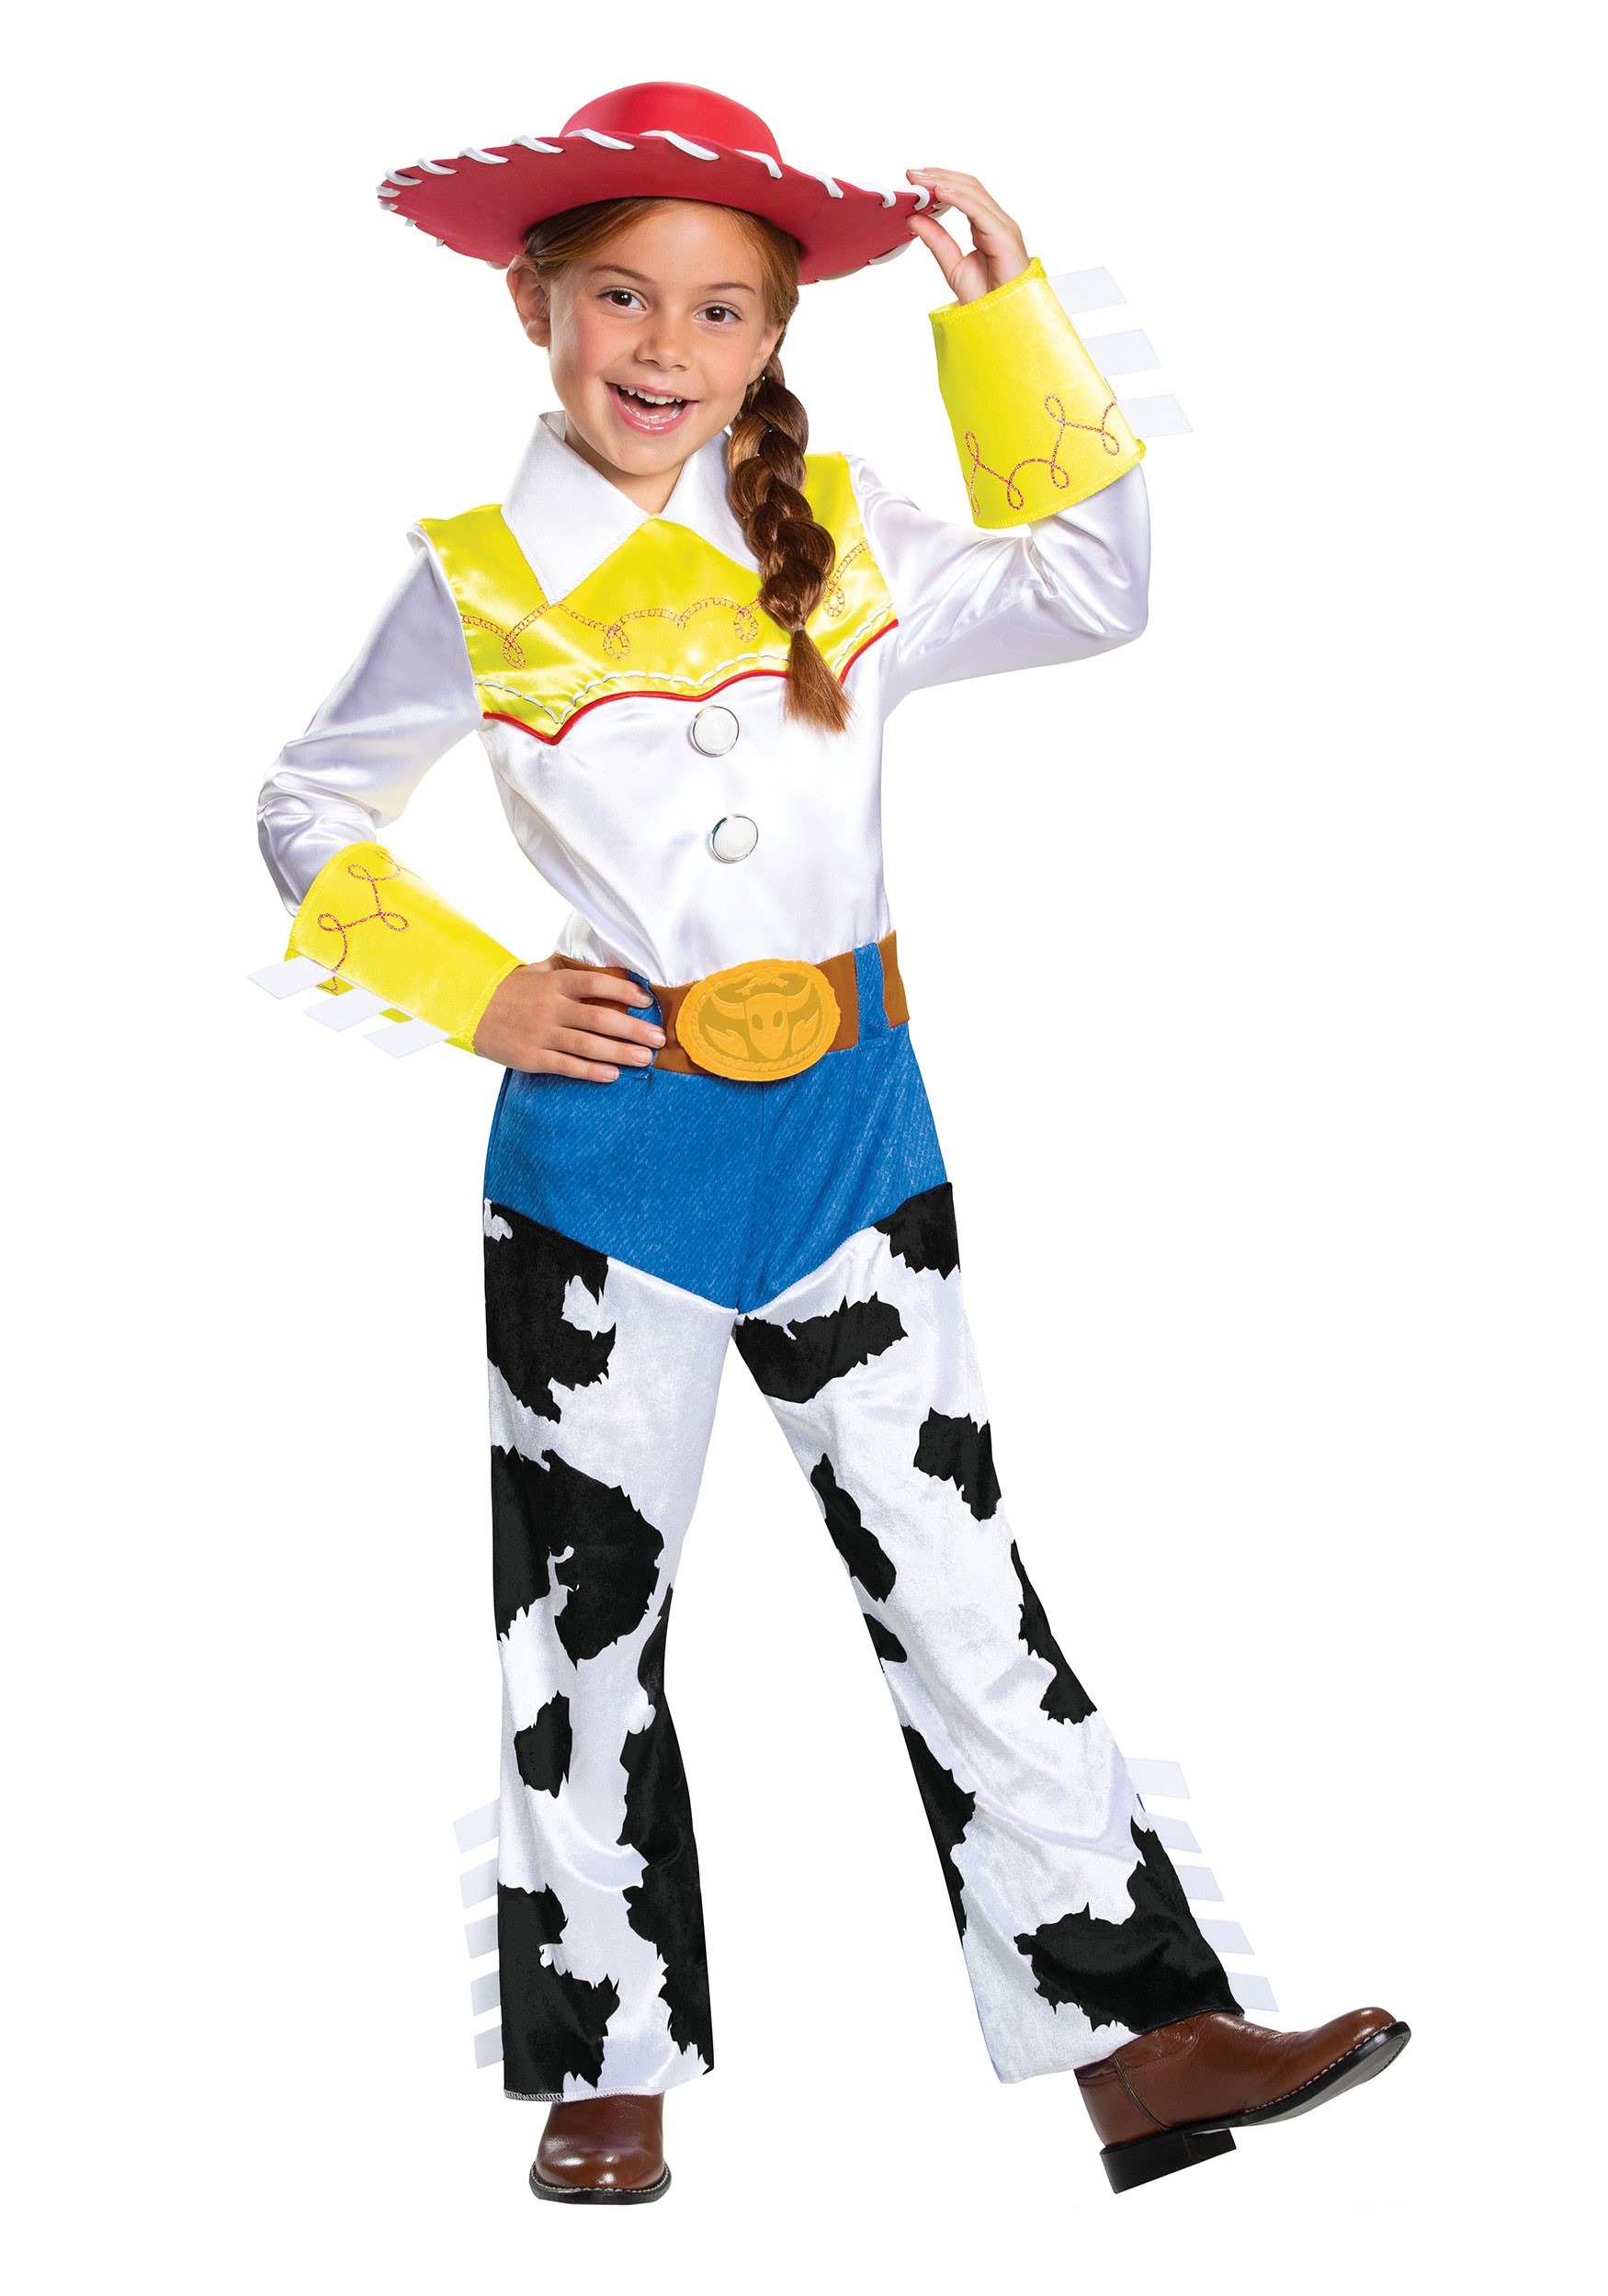 Photos - Fancy Dress Deluxe Disguise Toy Story Jessie  Costume for Girls Red/Yellow/Whit 